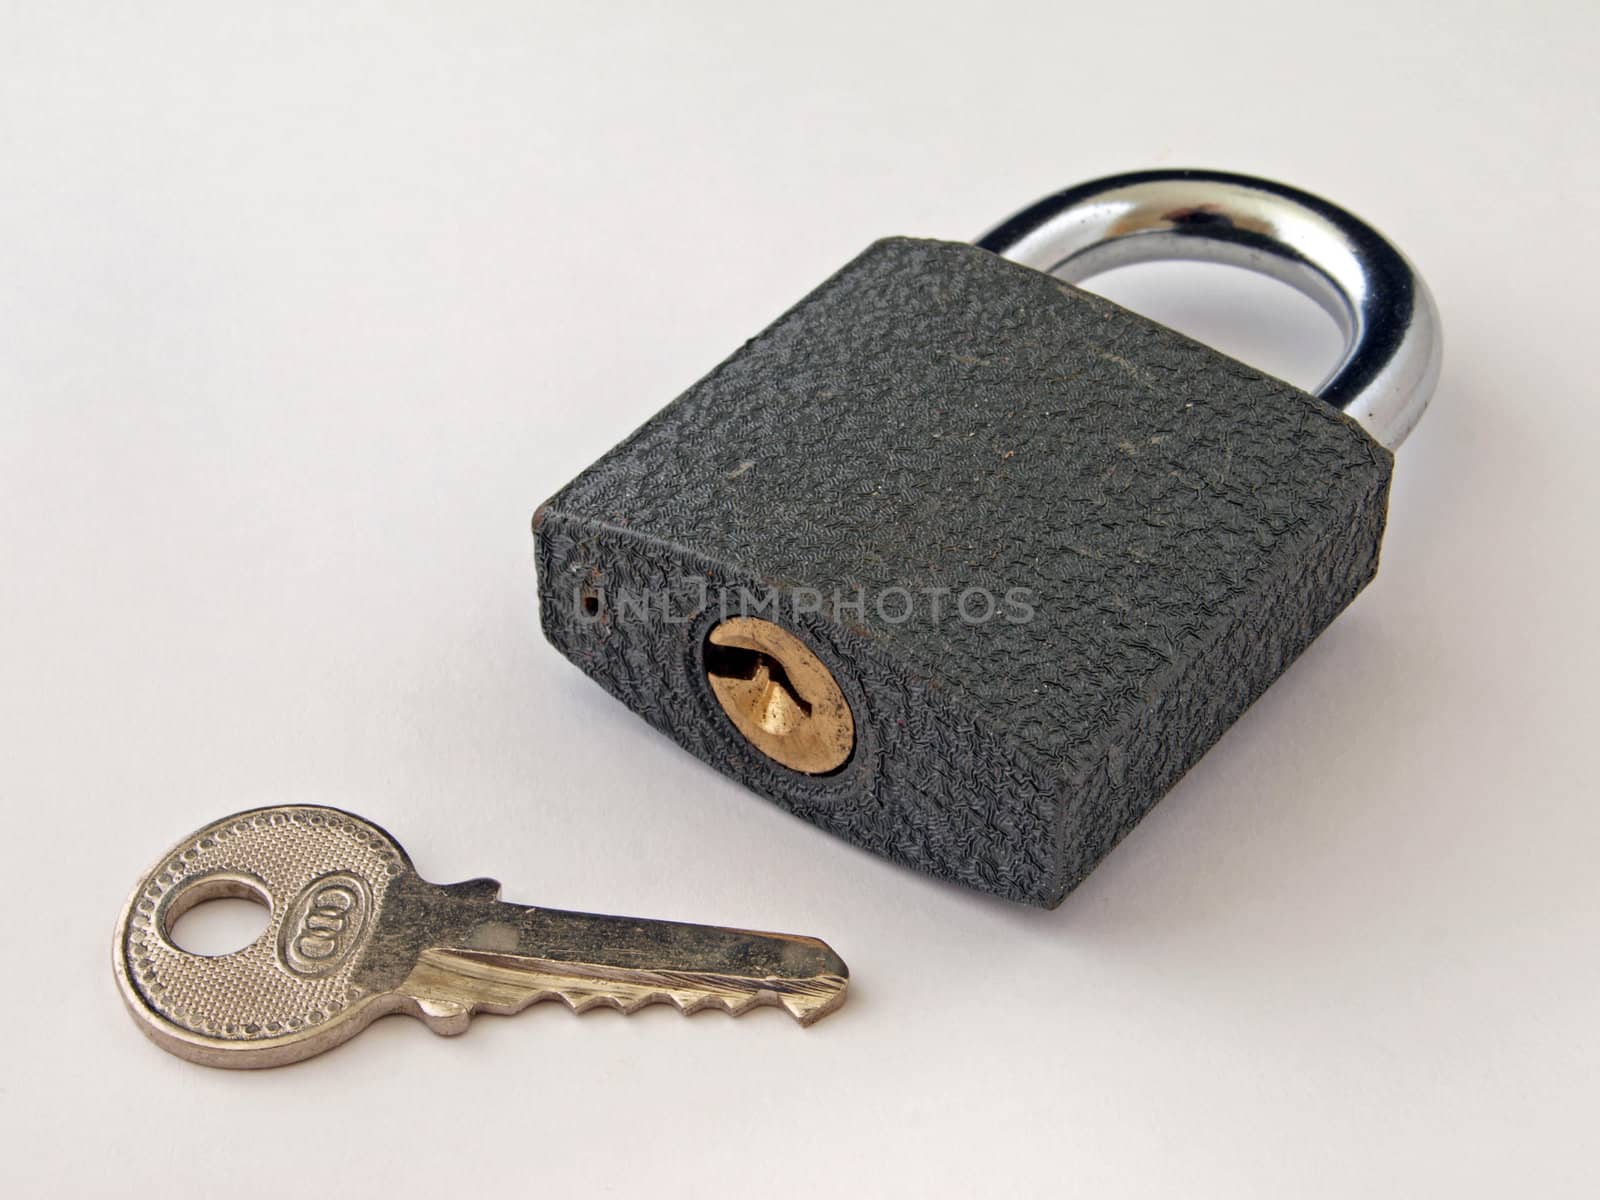 Padlock in the closed position and a key. 